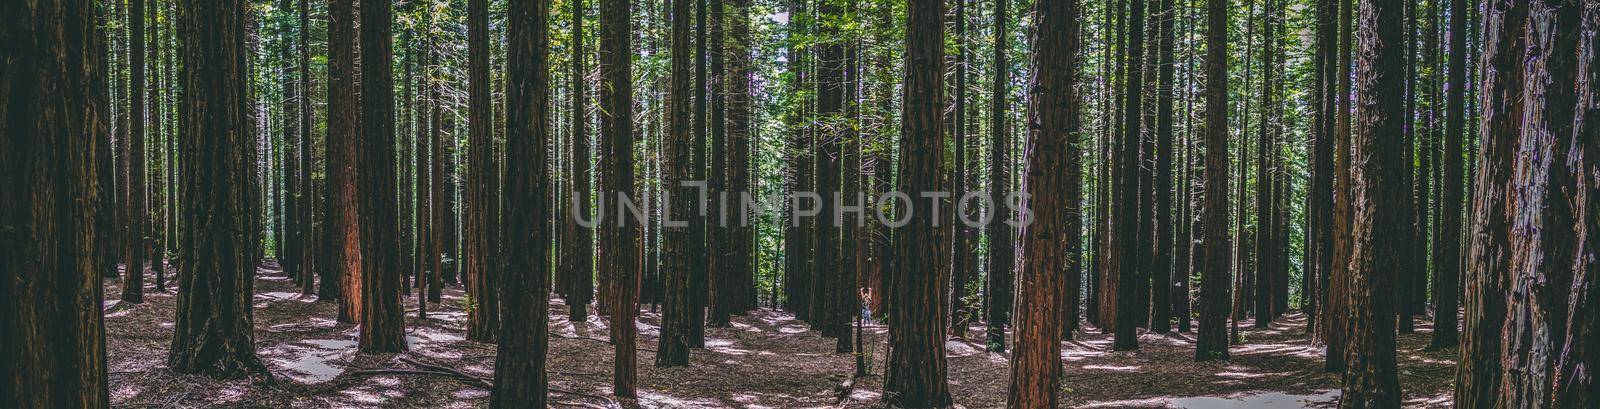 Rows of trees at the Redwood Forest Warburton in the Yarra Valley. Melbourne, Australia. by bettercallcurry